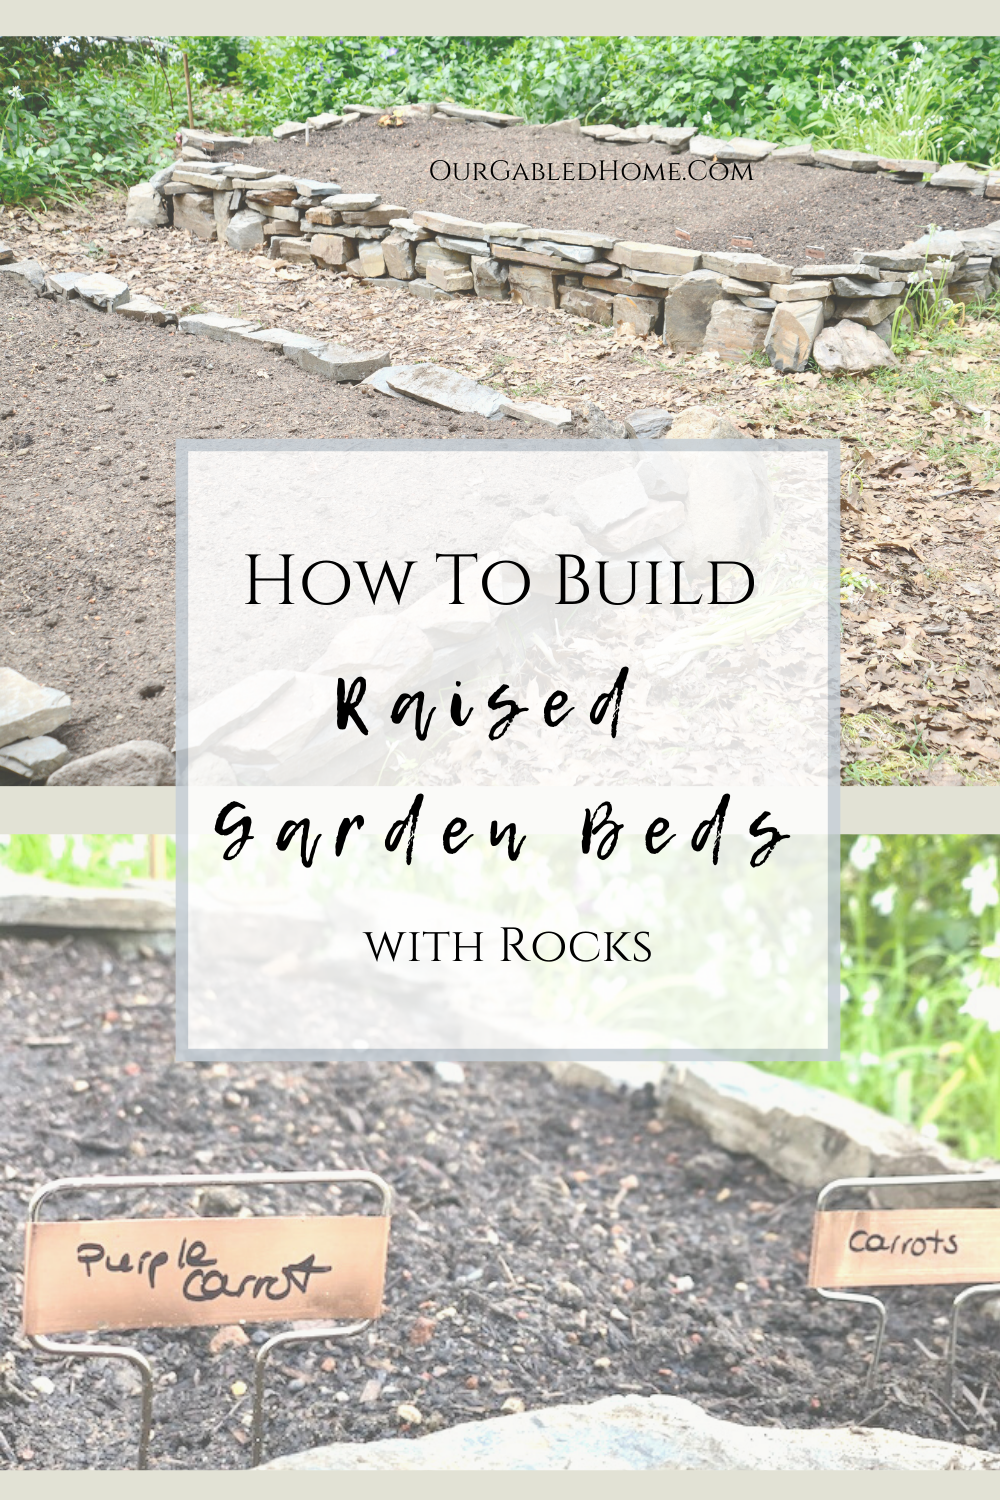 How to build raised garden beds with rocks
